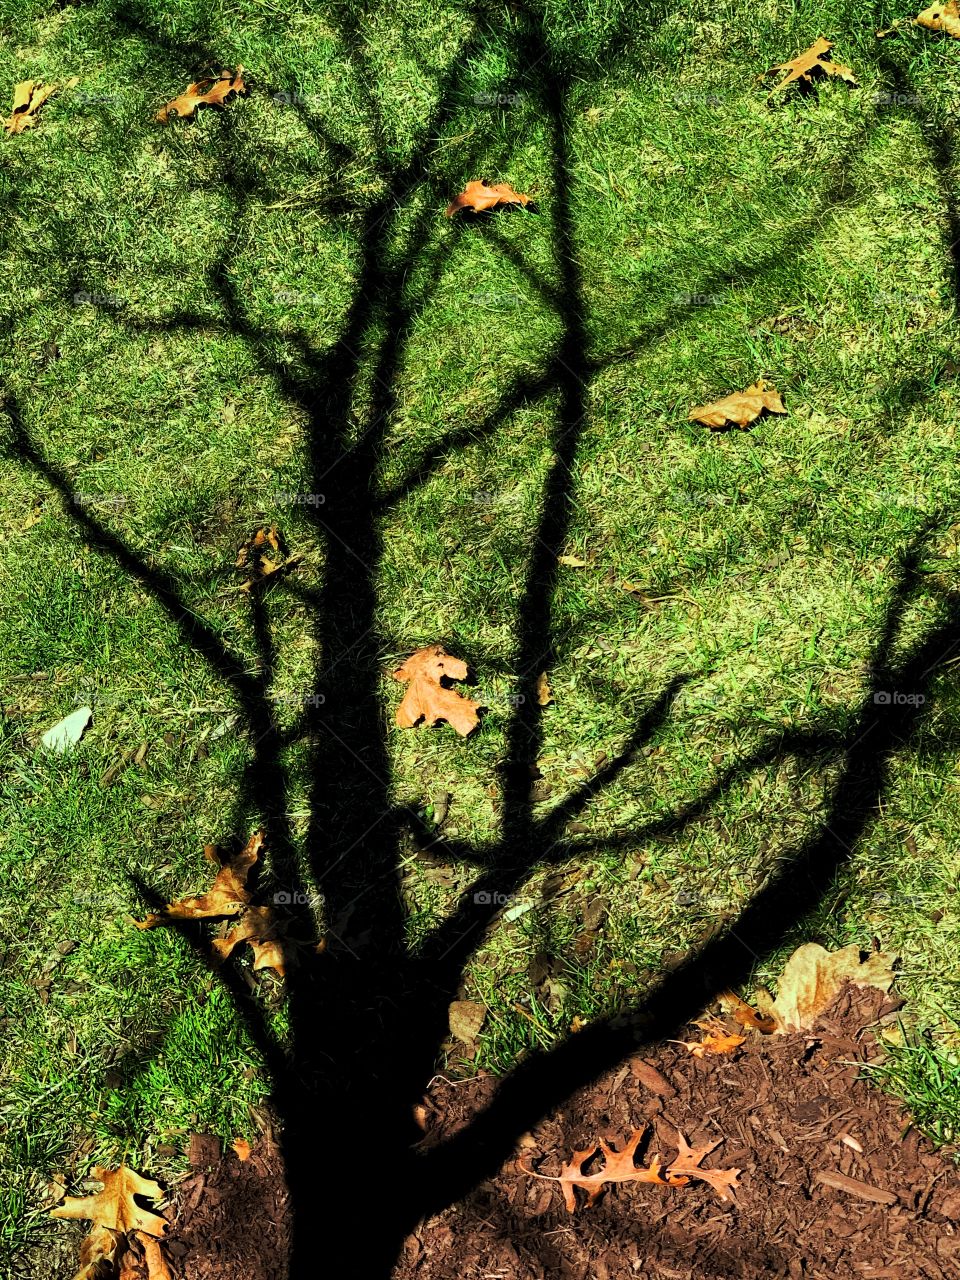 dark shadow of a tree with bare branches against green grass and leaves on the ground on a sunny spring day